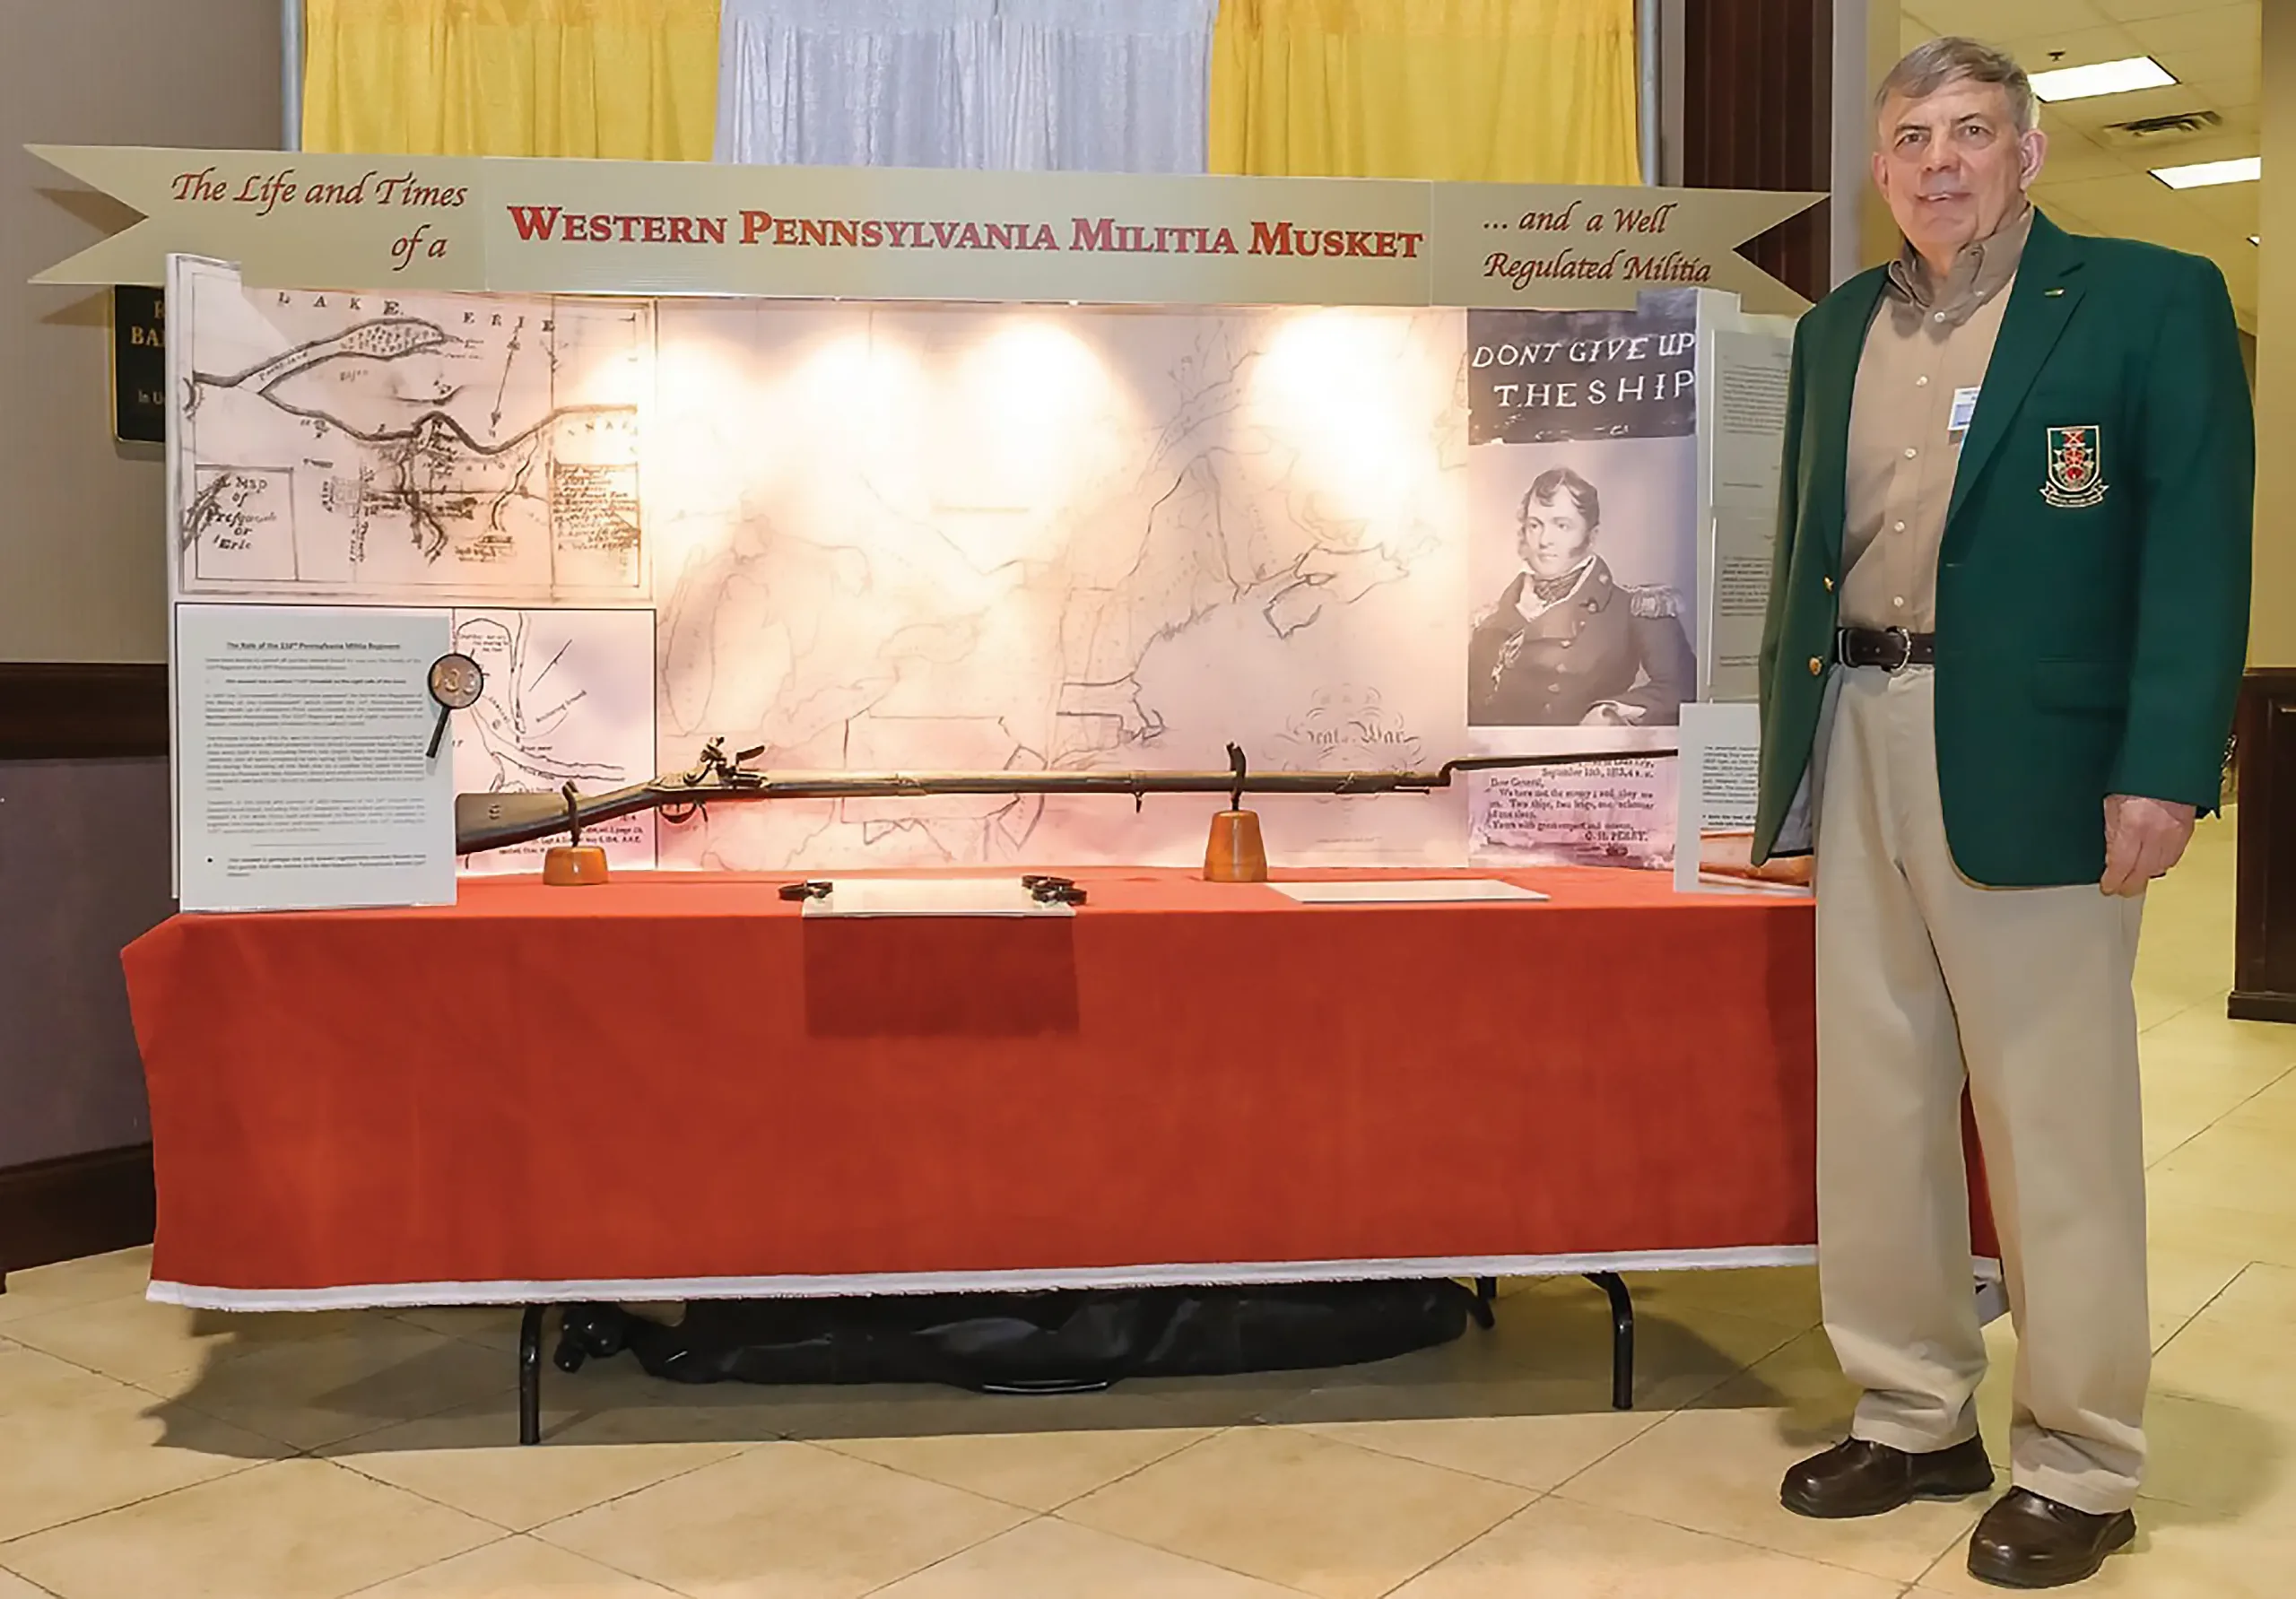 David Hanes at the 2016 Annual Display Show. His Baker musket won the 2016 Thomas L. Kyser Best Single Gun Award as well as an NRA Gun Collectors Affiliate Silver Medallion.